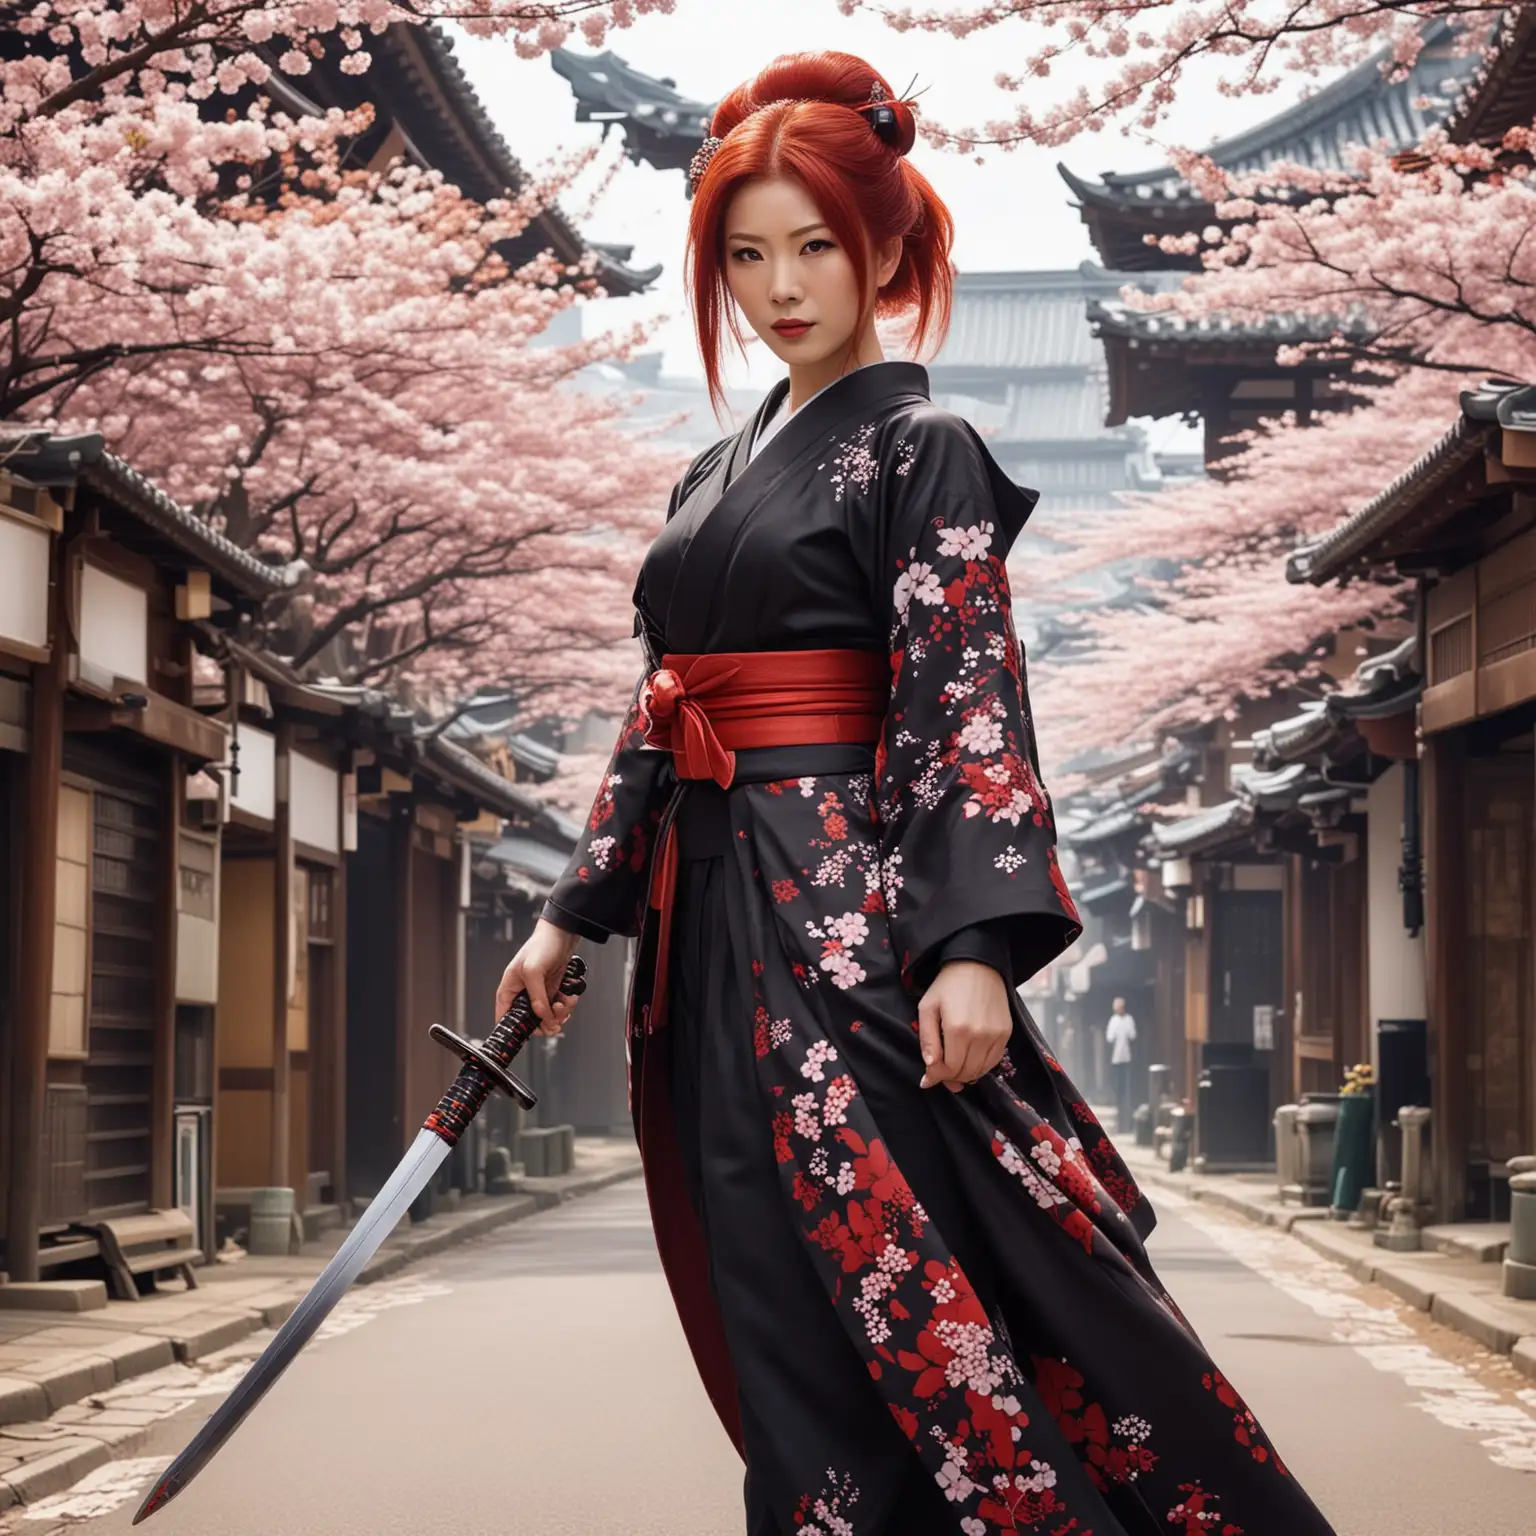 A 45 year old futuristic techno-geisha, who is also a master swordswoman. She is in the streets of Neo Edo, with blossom all over the ground. She has red hair, looks confident